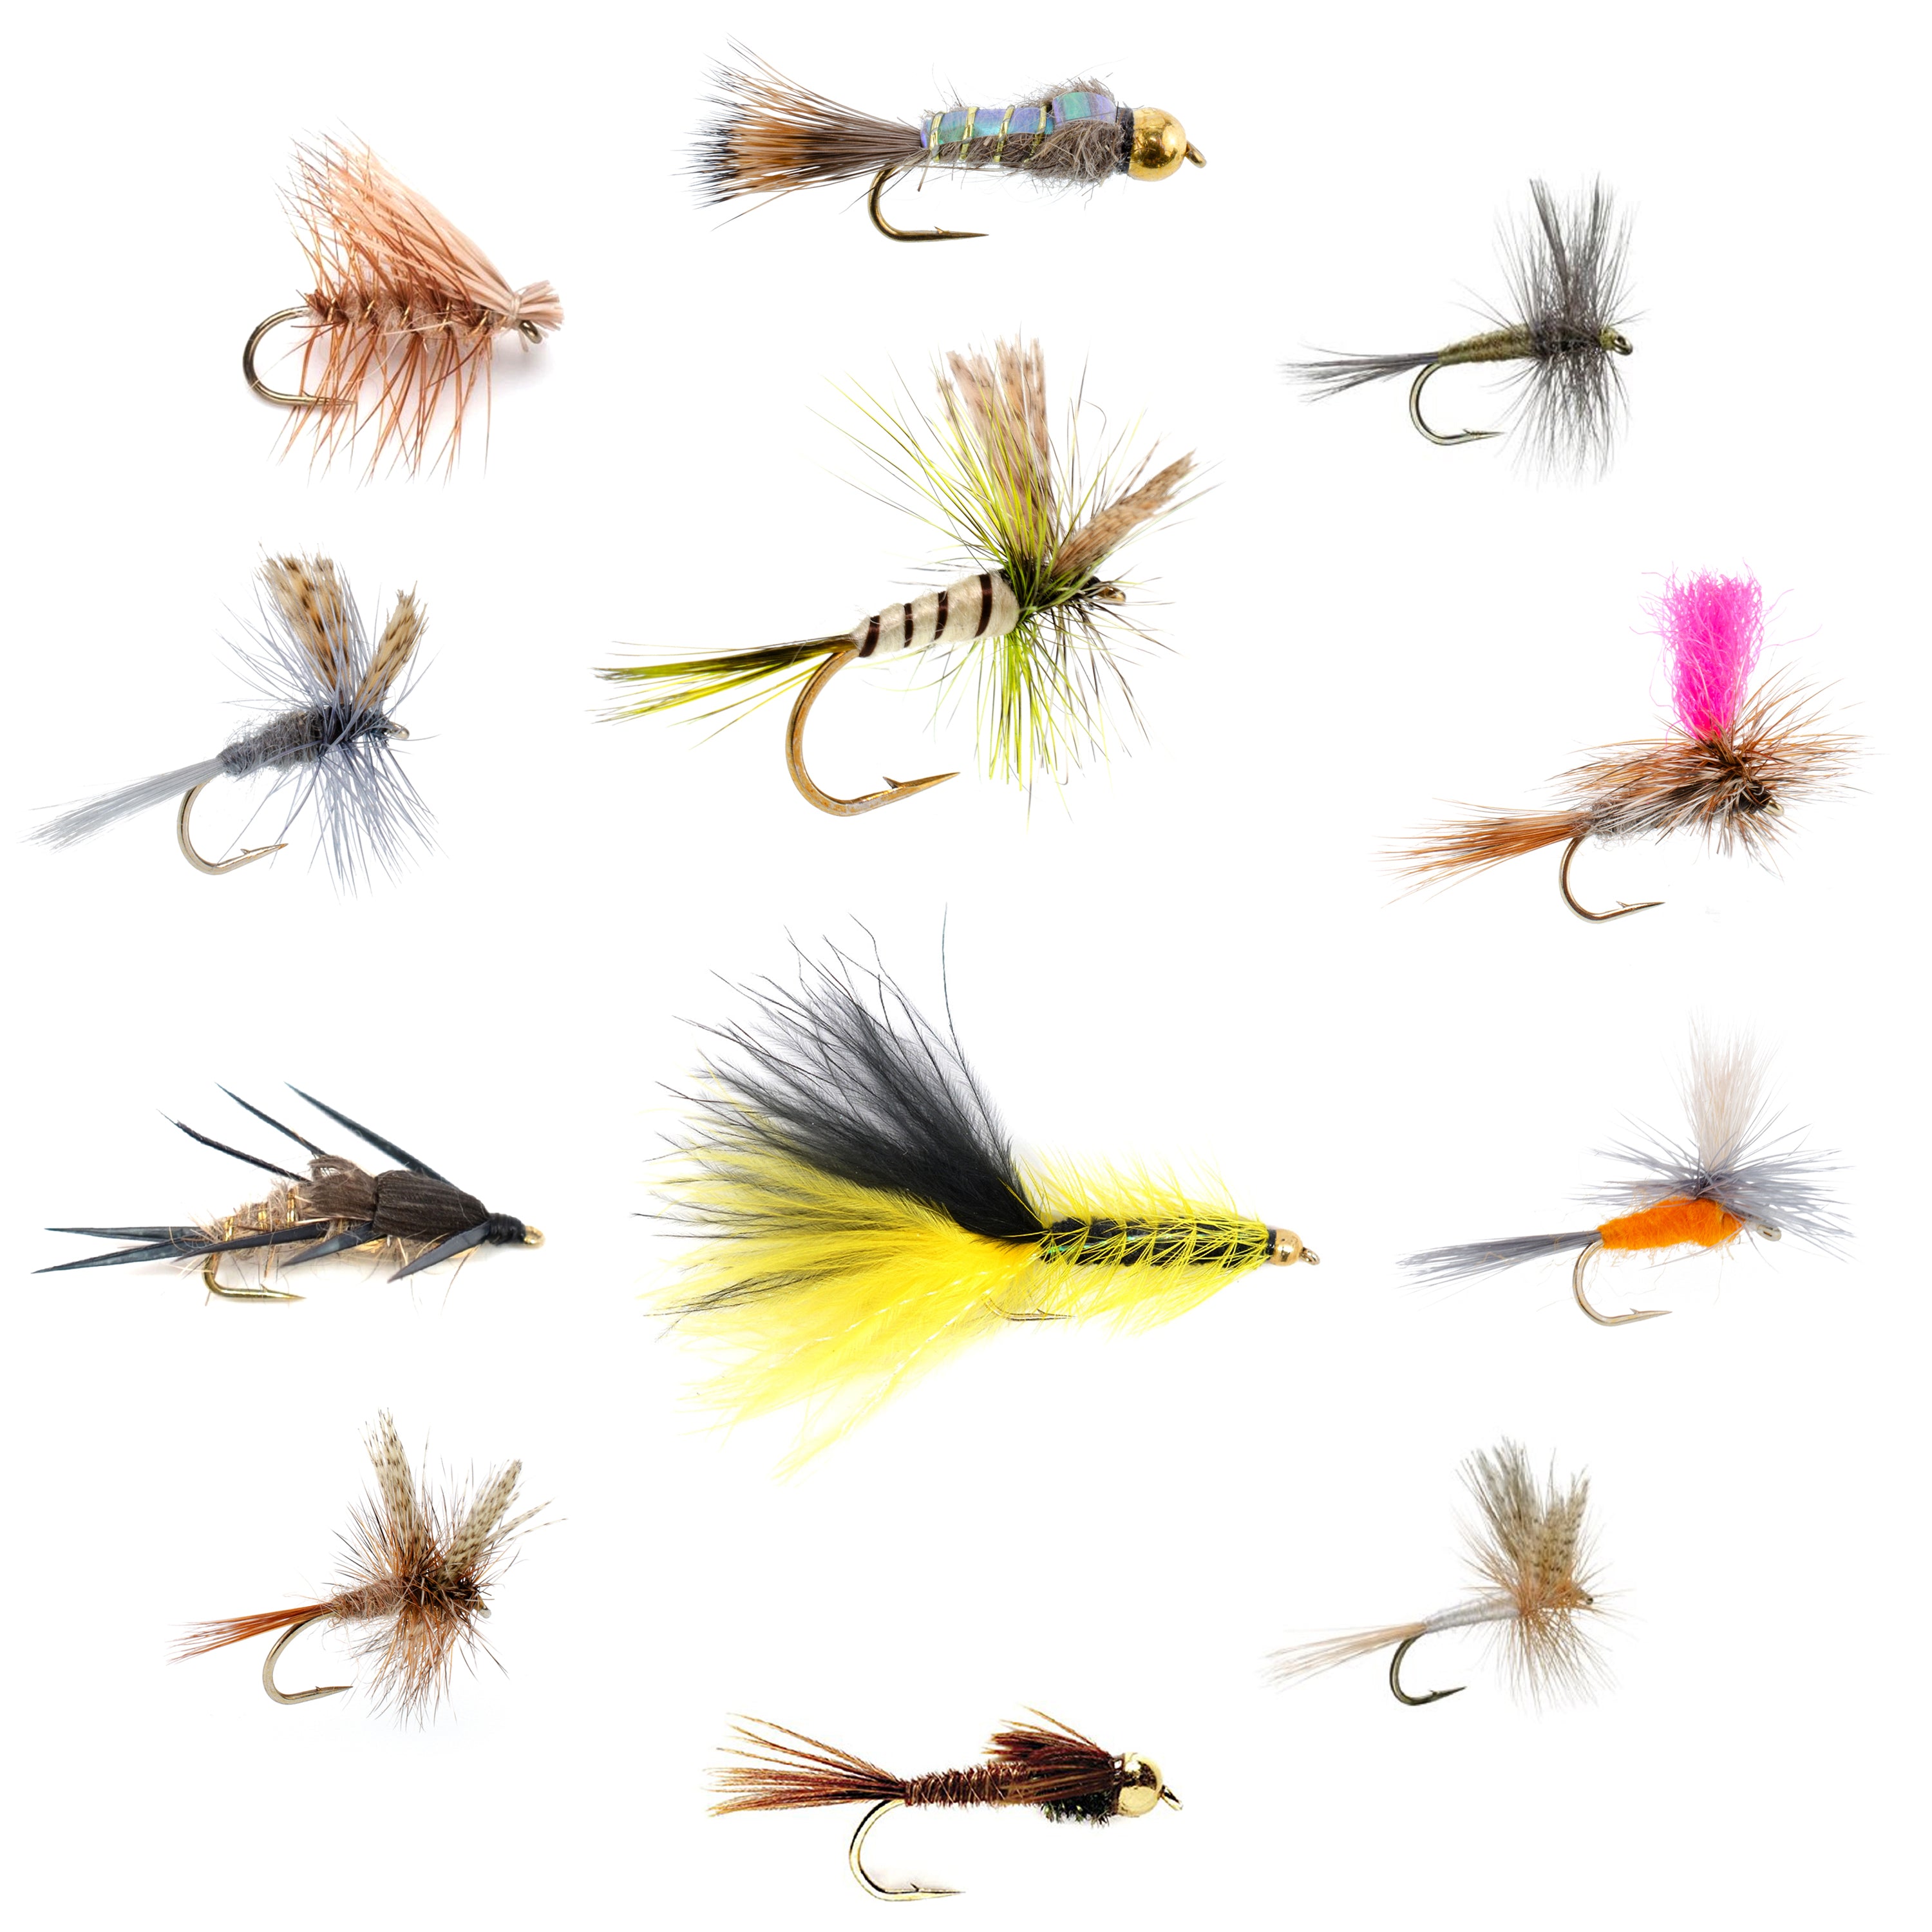 Eastern Trout Fly Assortment - 12 Essential Dry and Nymph Fly Fishing Flies Collection - Trout Flies with Gift Fly Box